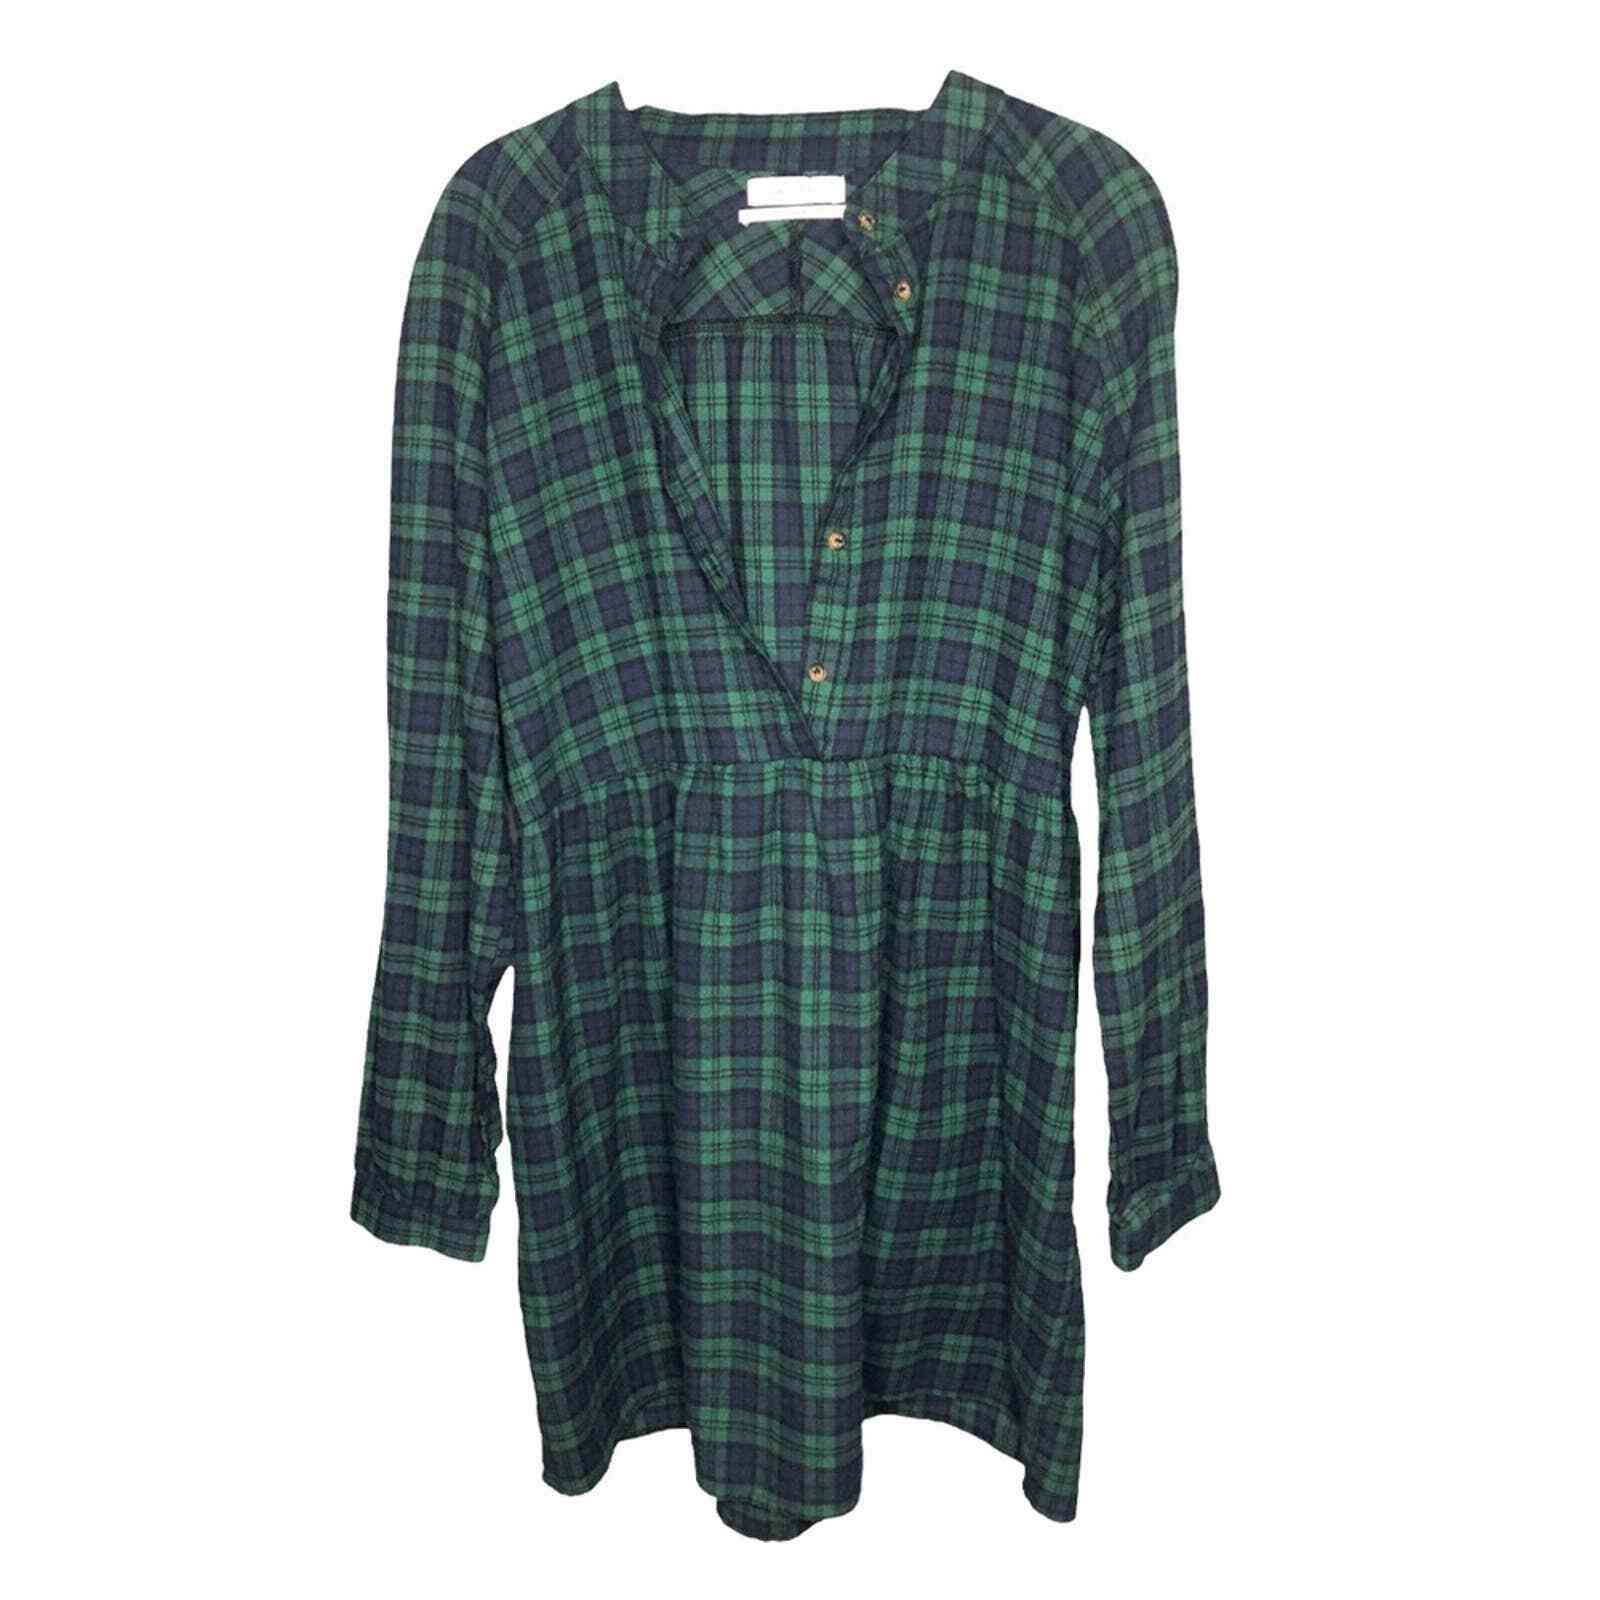 Urban Outfitters Plaid Flannel Mini Shirt Dress - image 1